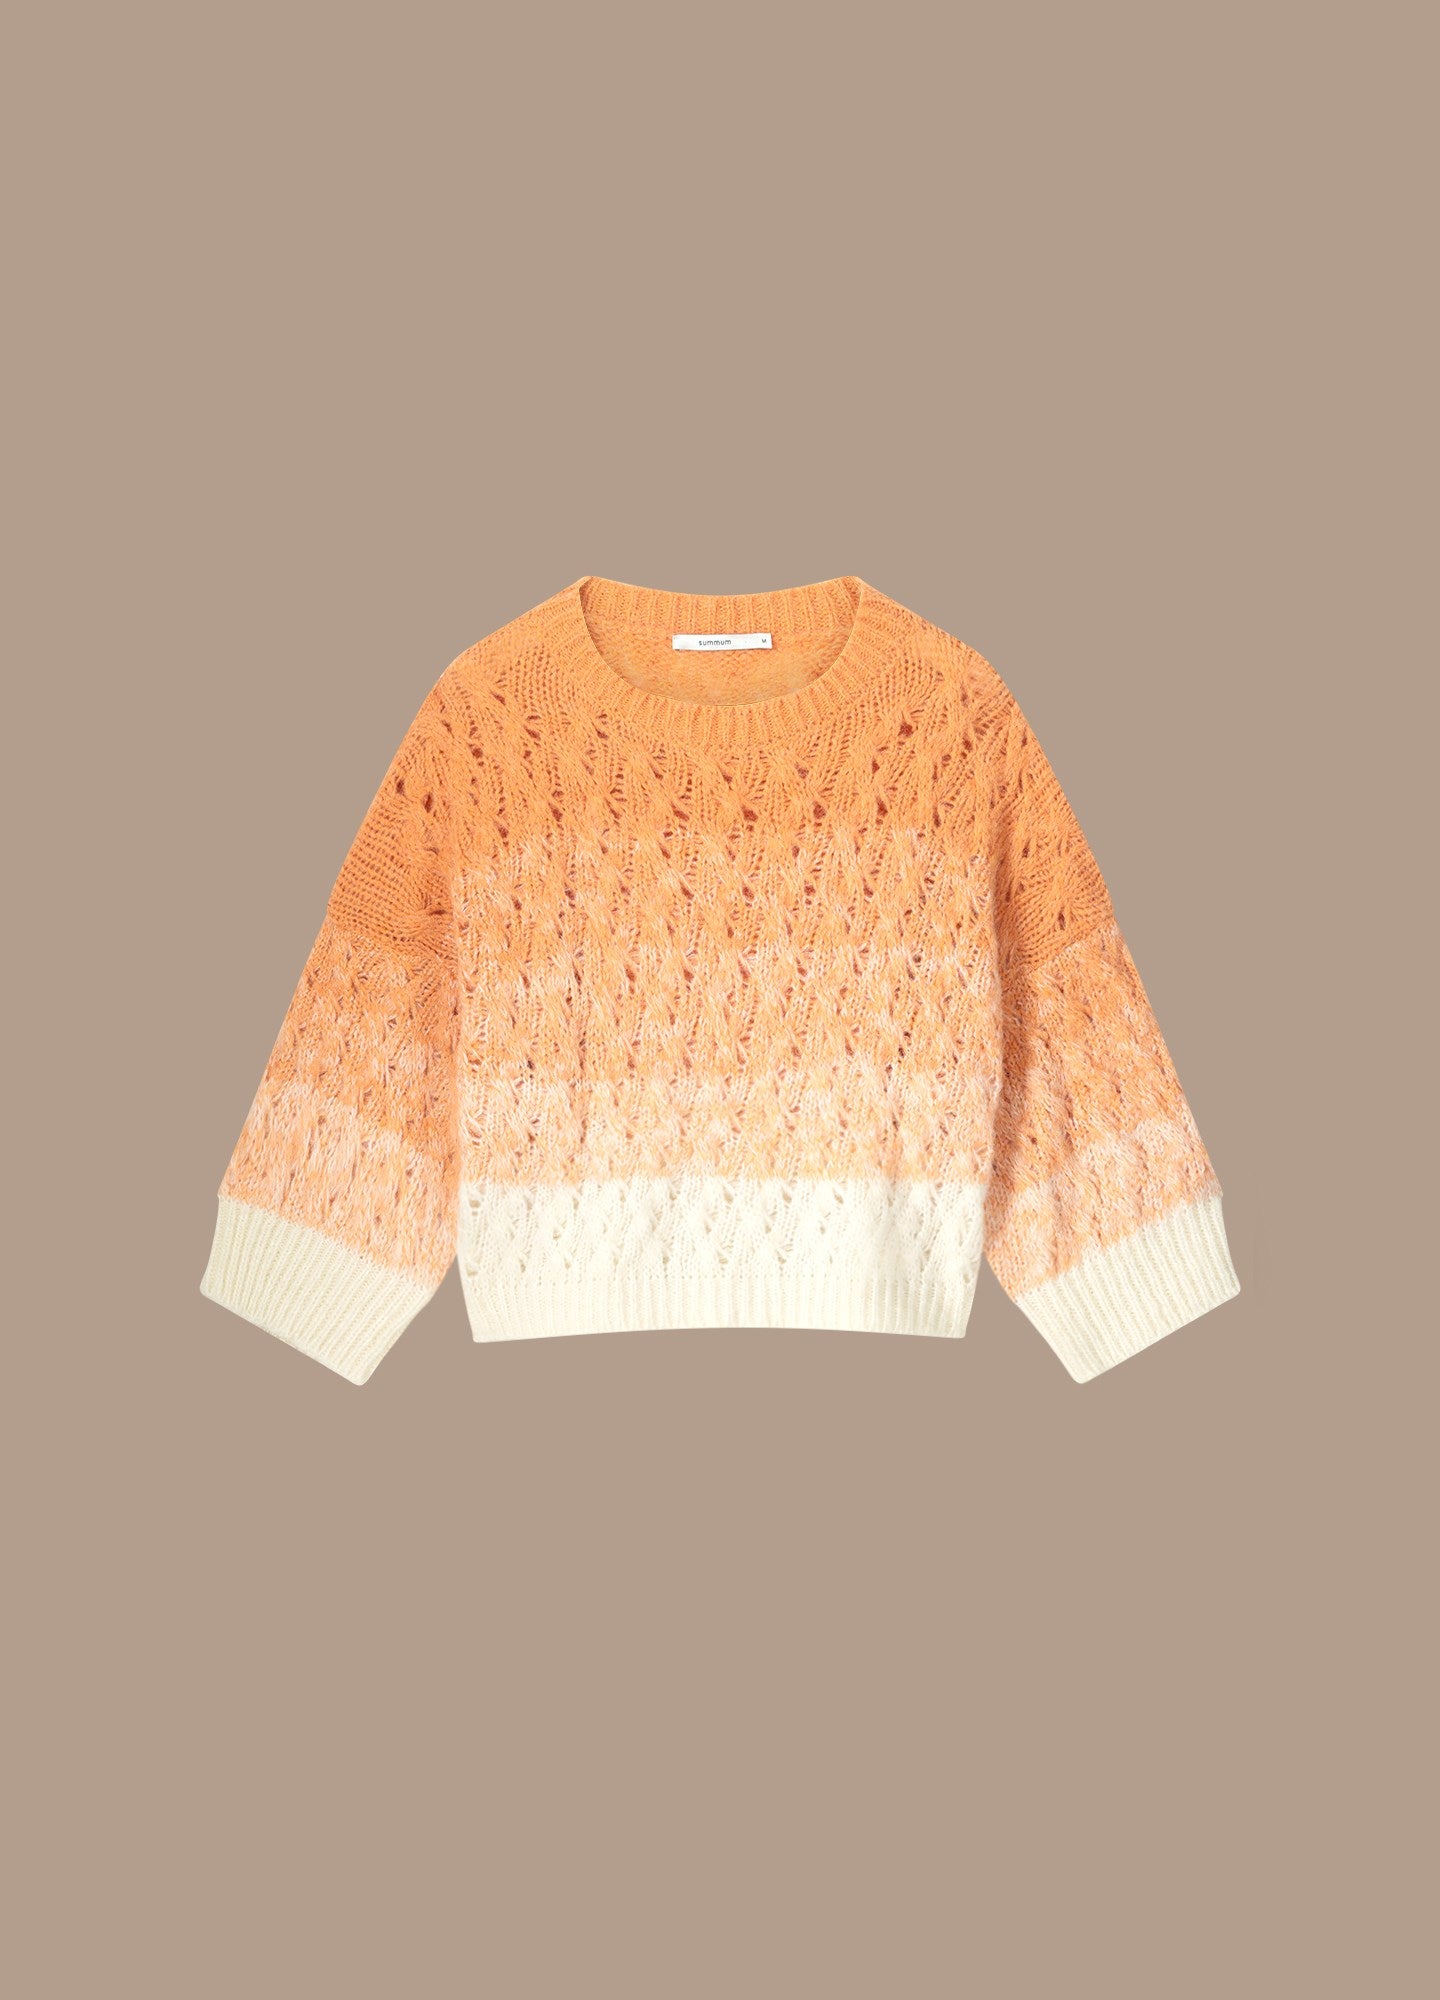 Boxy jumper in a degraded look